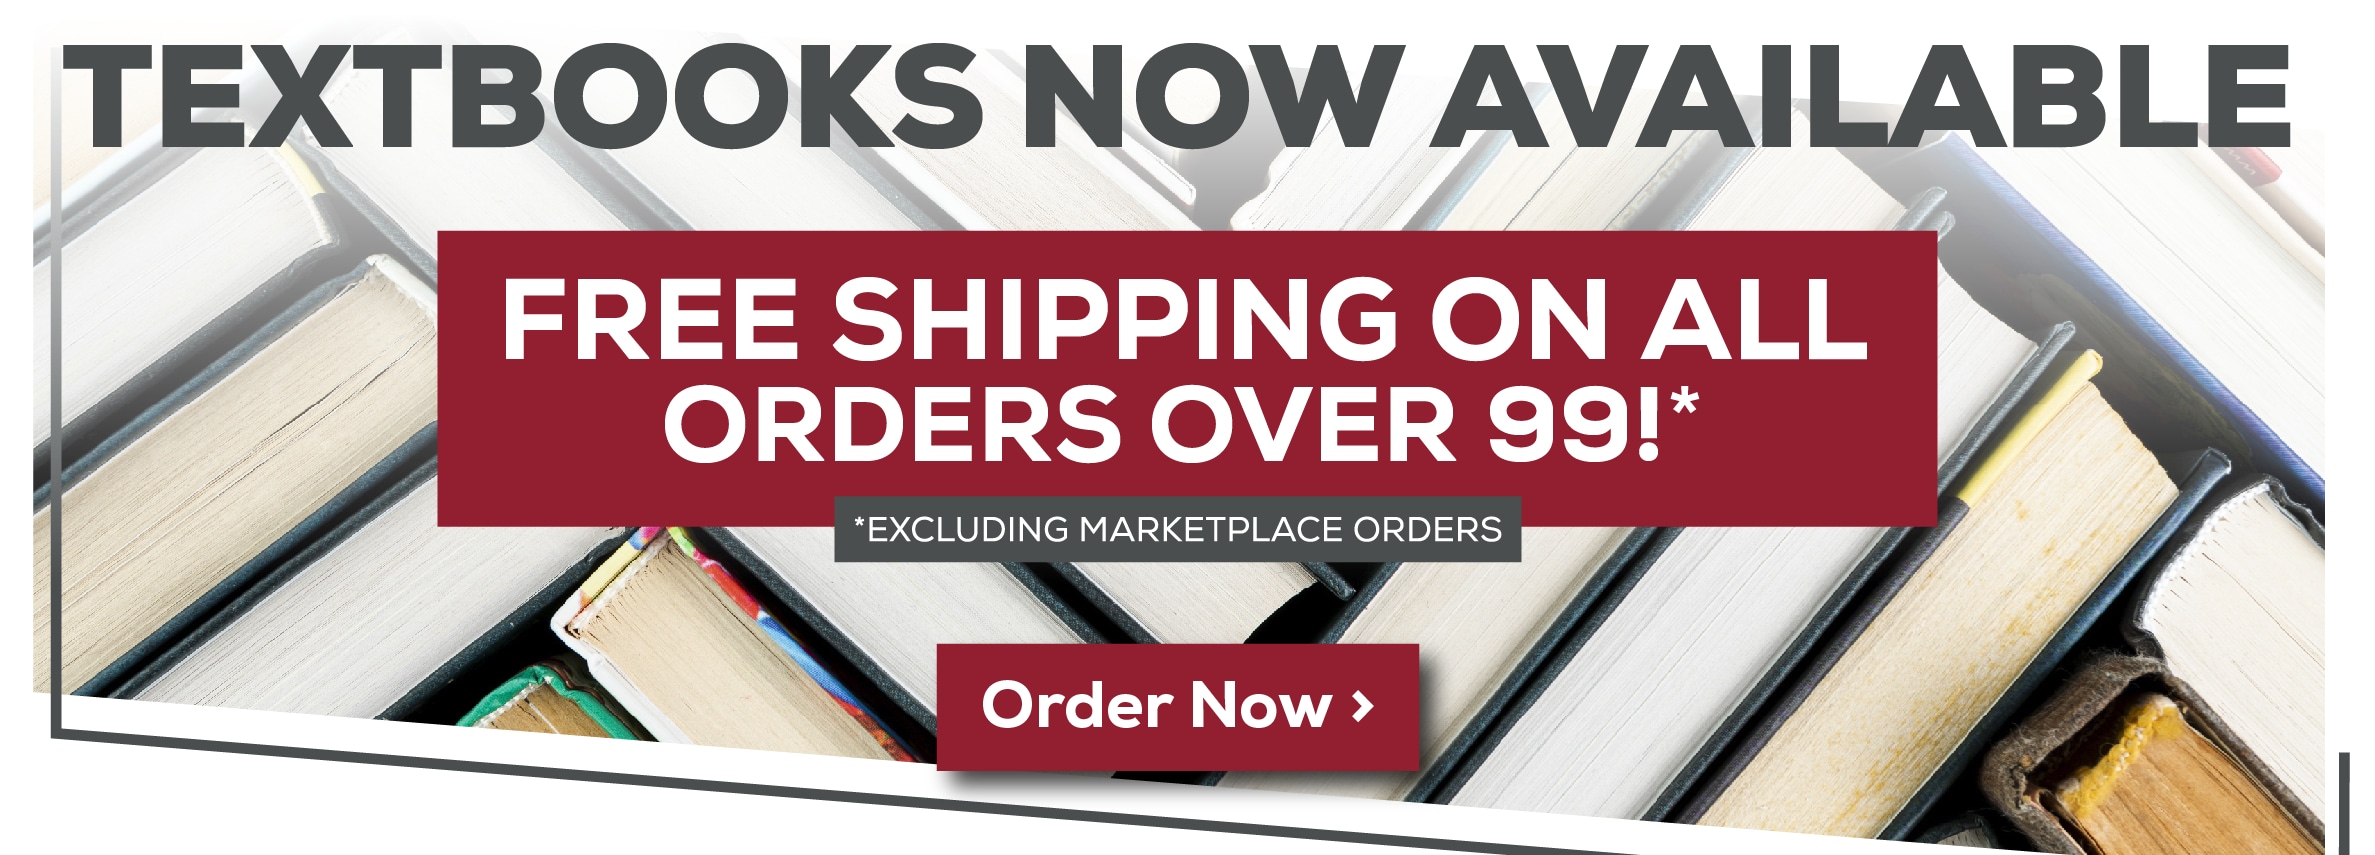 Textbooks Now Available. Free shipping on all orders over $99. Order now